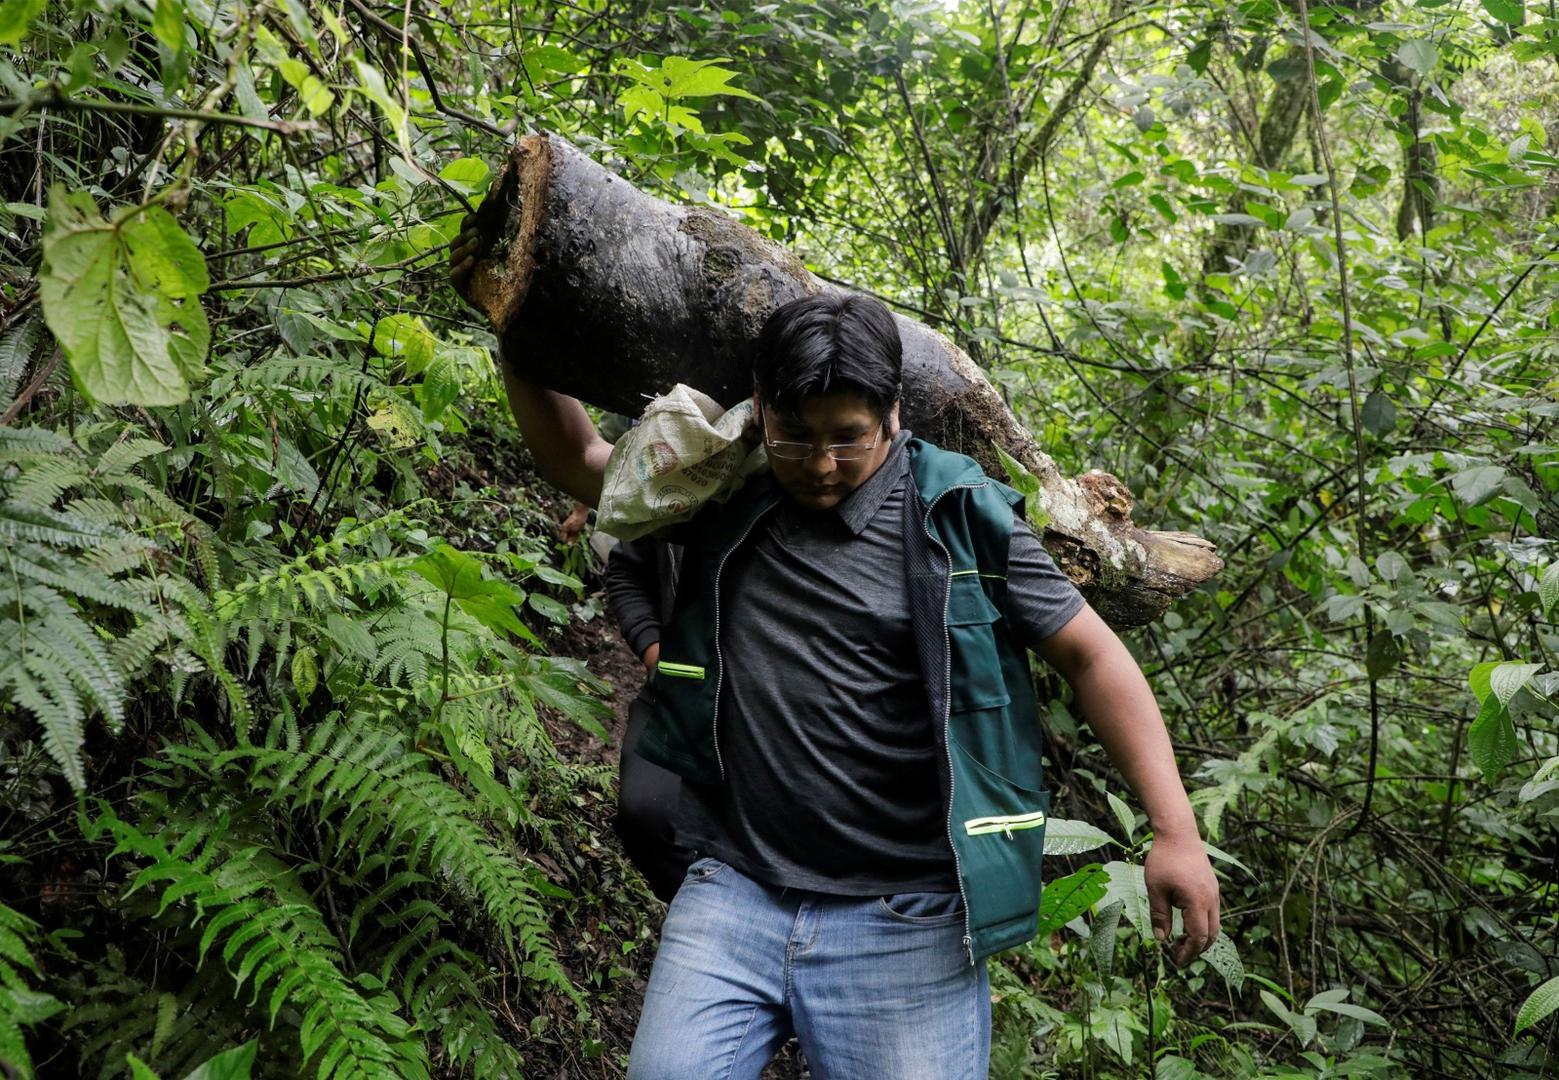 Erick Paredes carries a trunk containing a honeycomb of native bees at the bee sanctuary Las Orquideas Ecoparque in Cotapata, Yungas Erick Paredes carries a trunk containing a honeycomb of native bees at the bee sanctuary Las Orquideas Ecoparque in Cotapata, Yungas, Bolivia, January 13, 2021. Picture taken January 13, 2021. REUTERS/David Mercado DAVID MERCADO